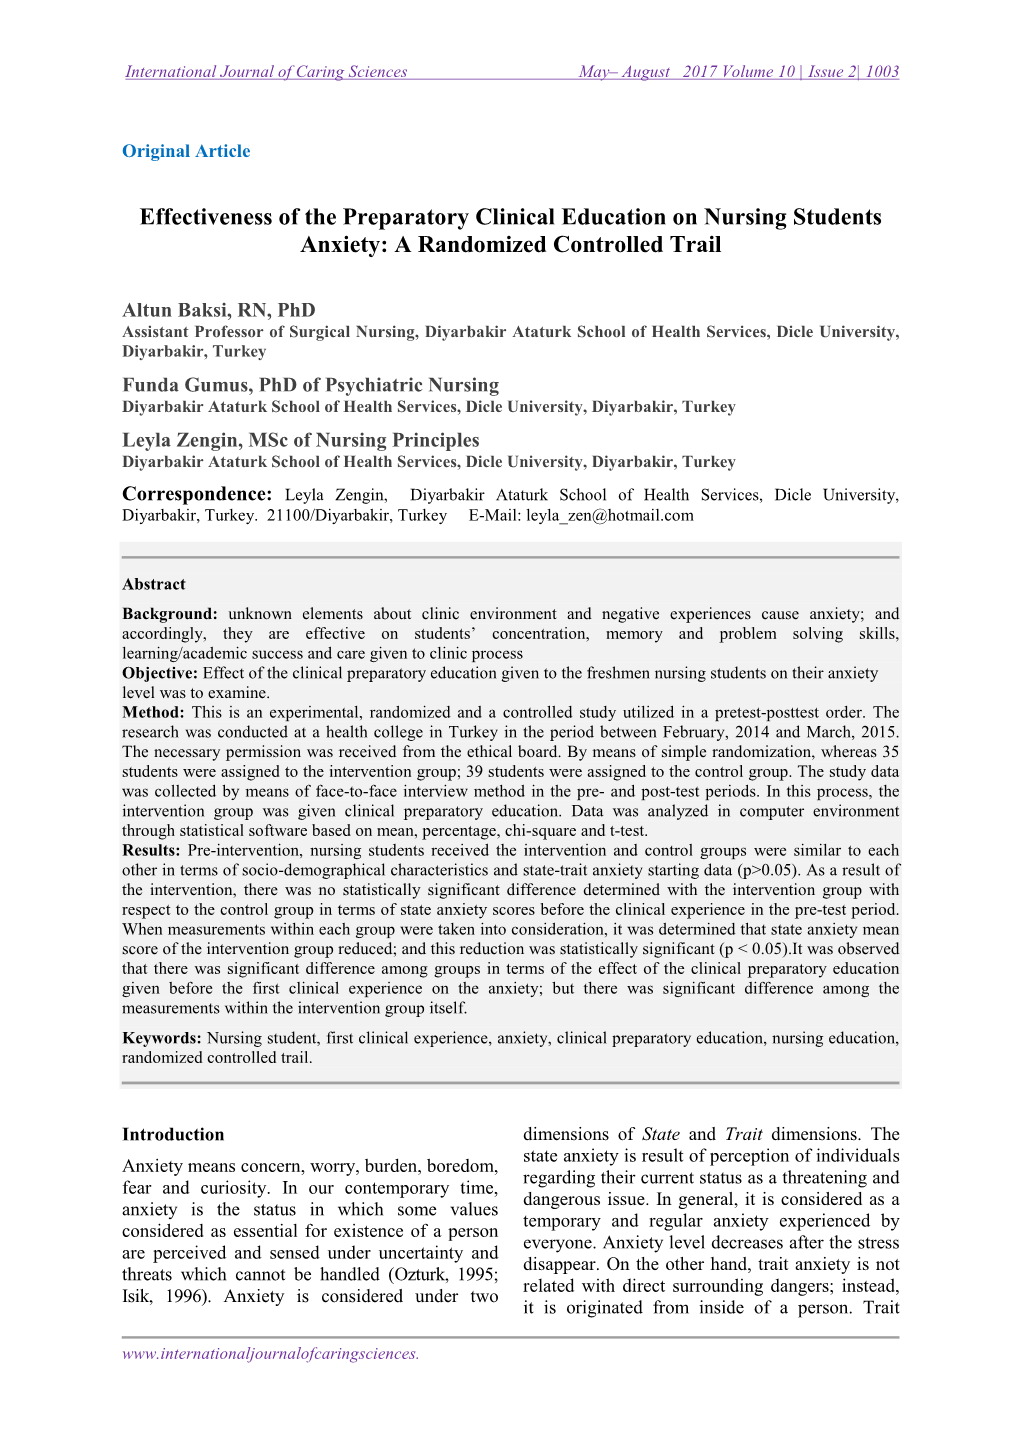 Effectiveness of the Preparatory Clinical Education on Nursing Students Anxiety: a Randomized Controlled Trail